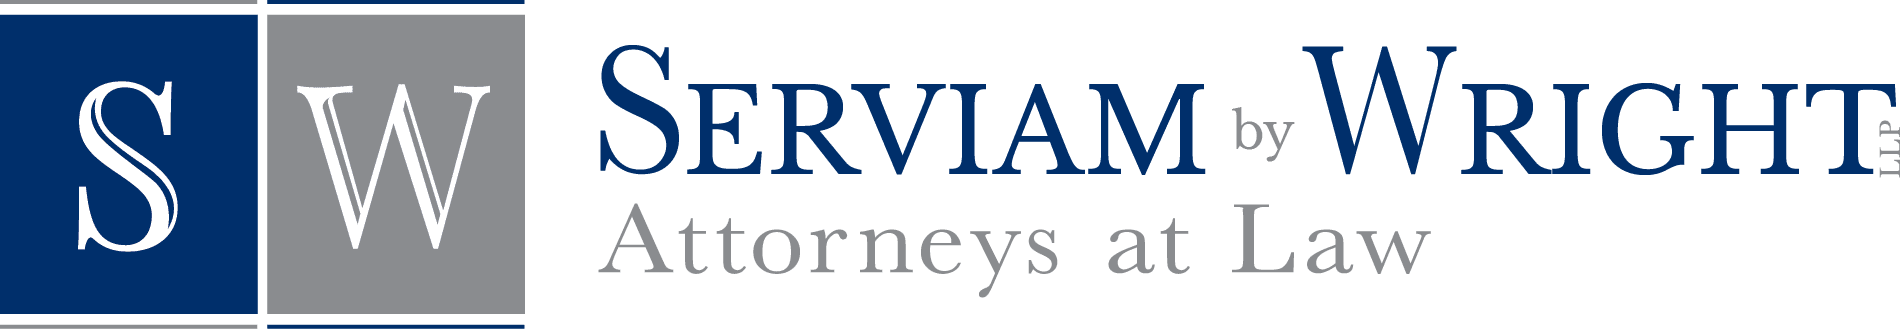 Serviam by Wright LLP website logo horizontal clear